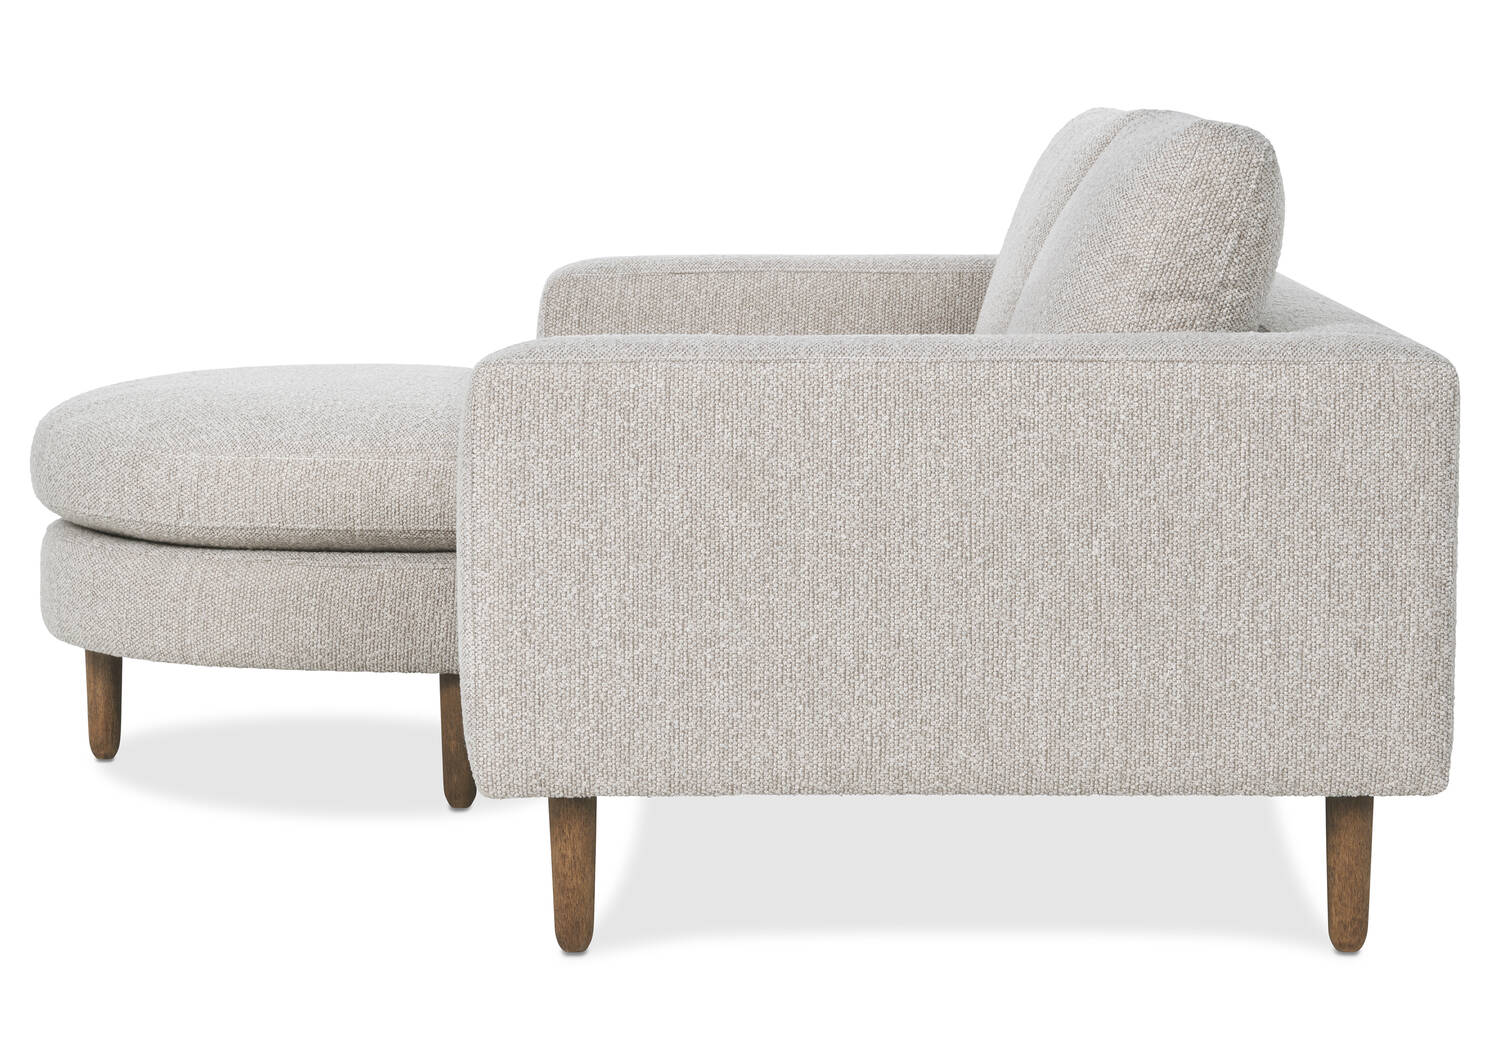 Beatrice Flip Sofa Chaise 68" -Luly Sand